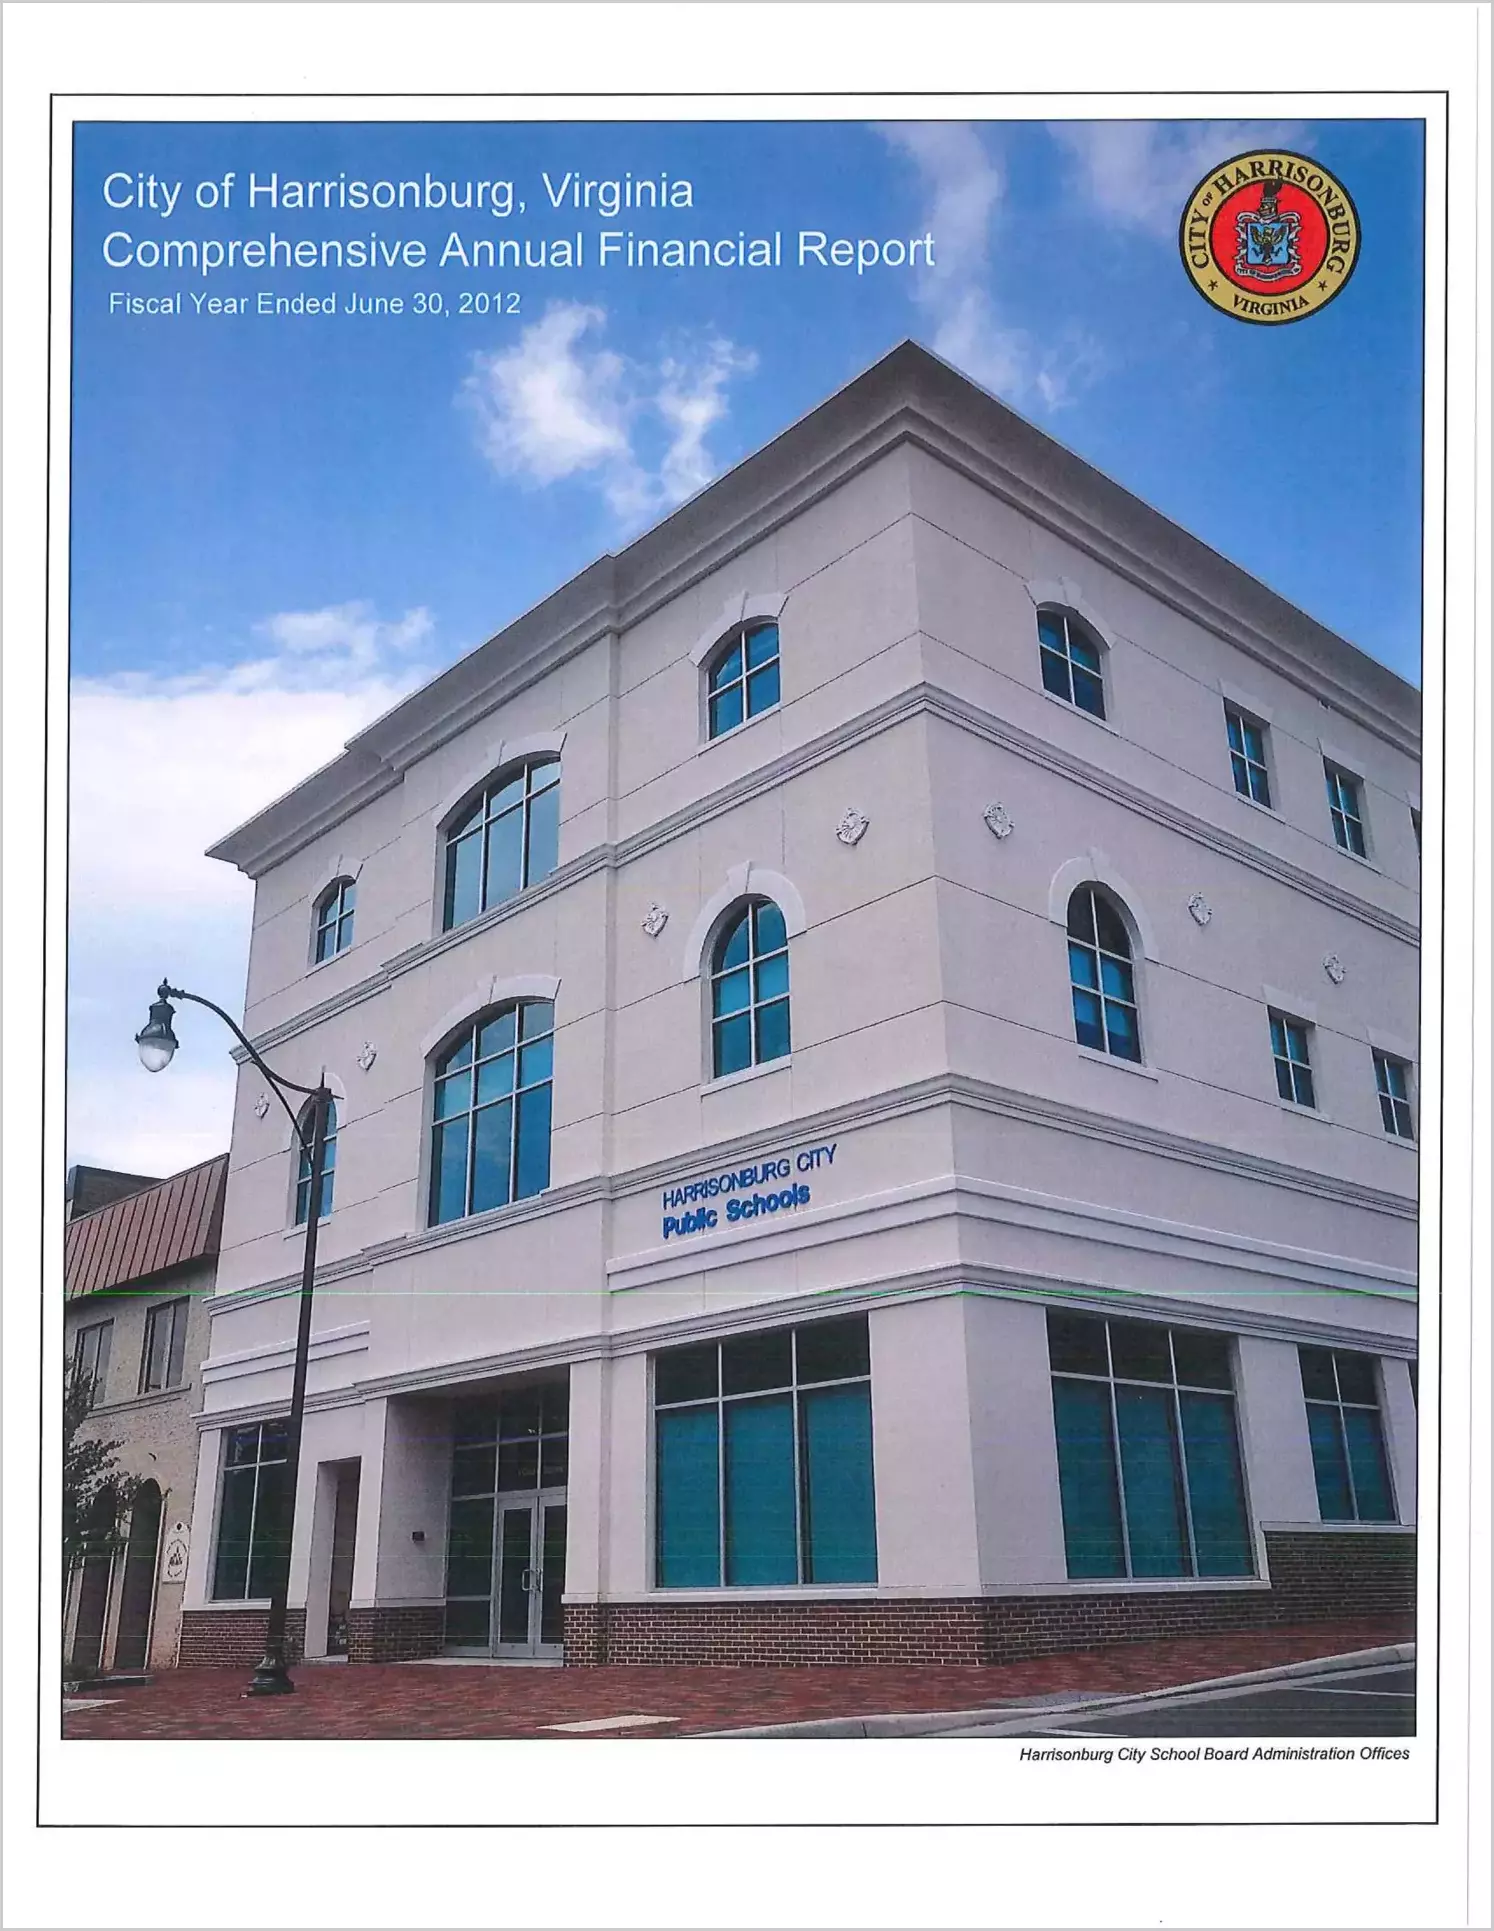 2012 Annual Financial Report for City of Harrisonburg